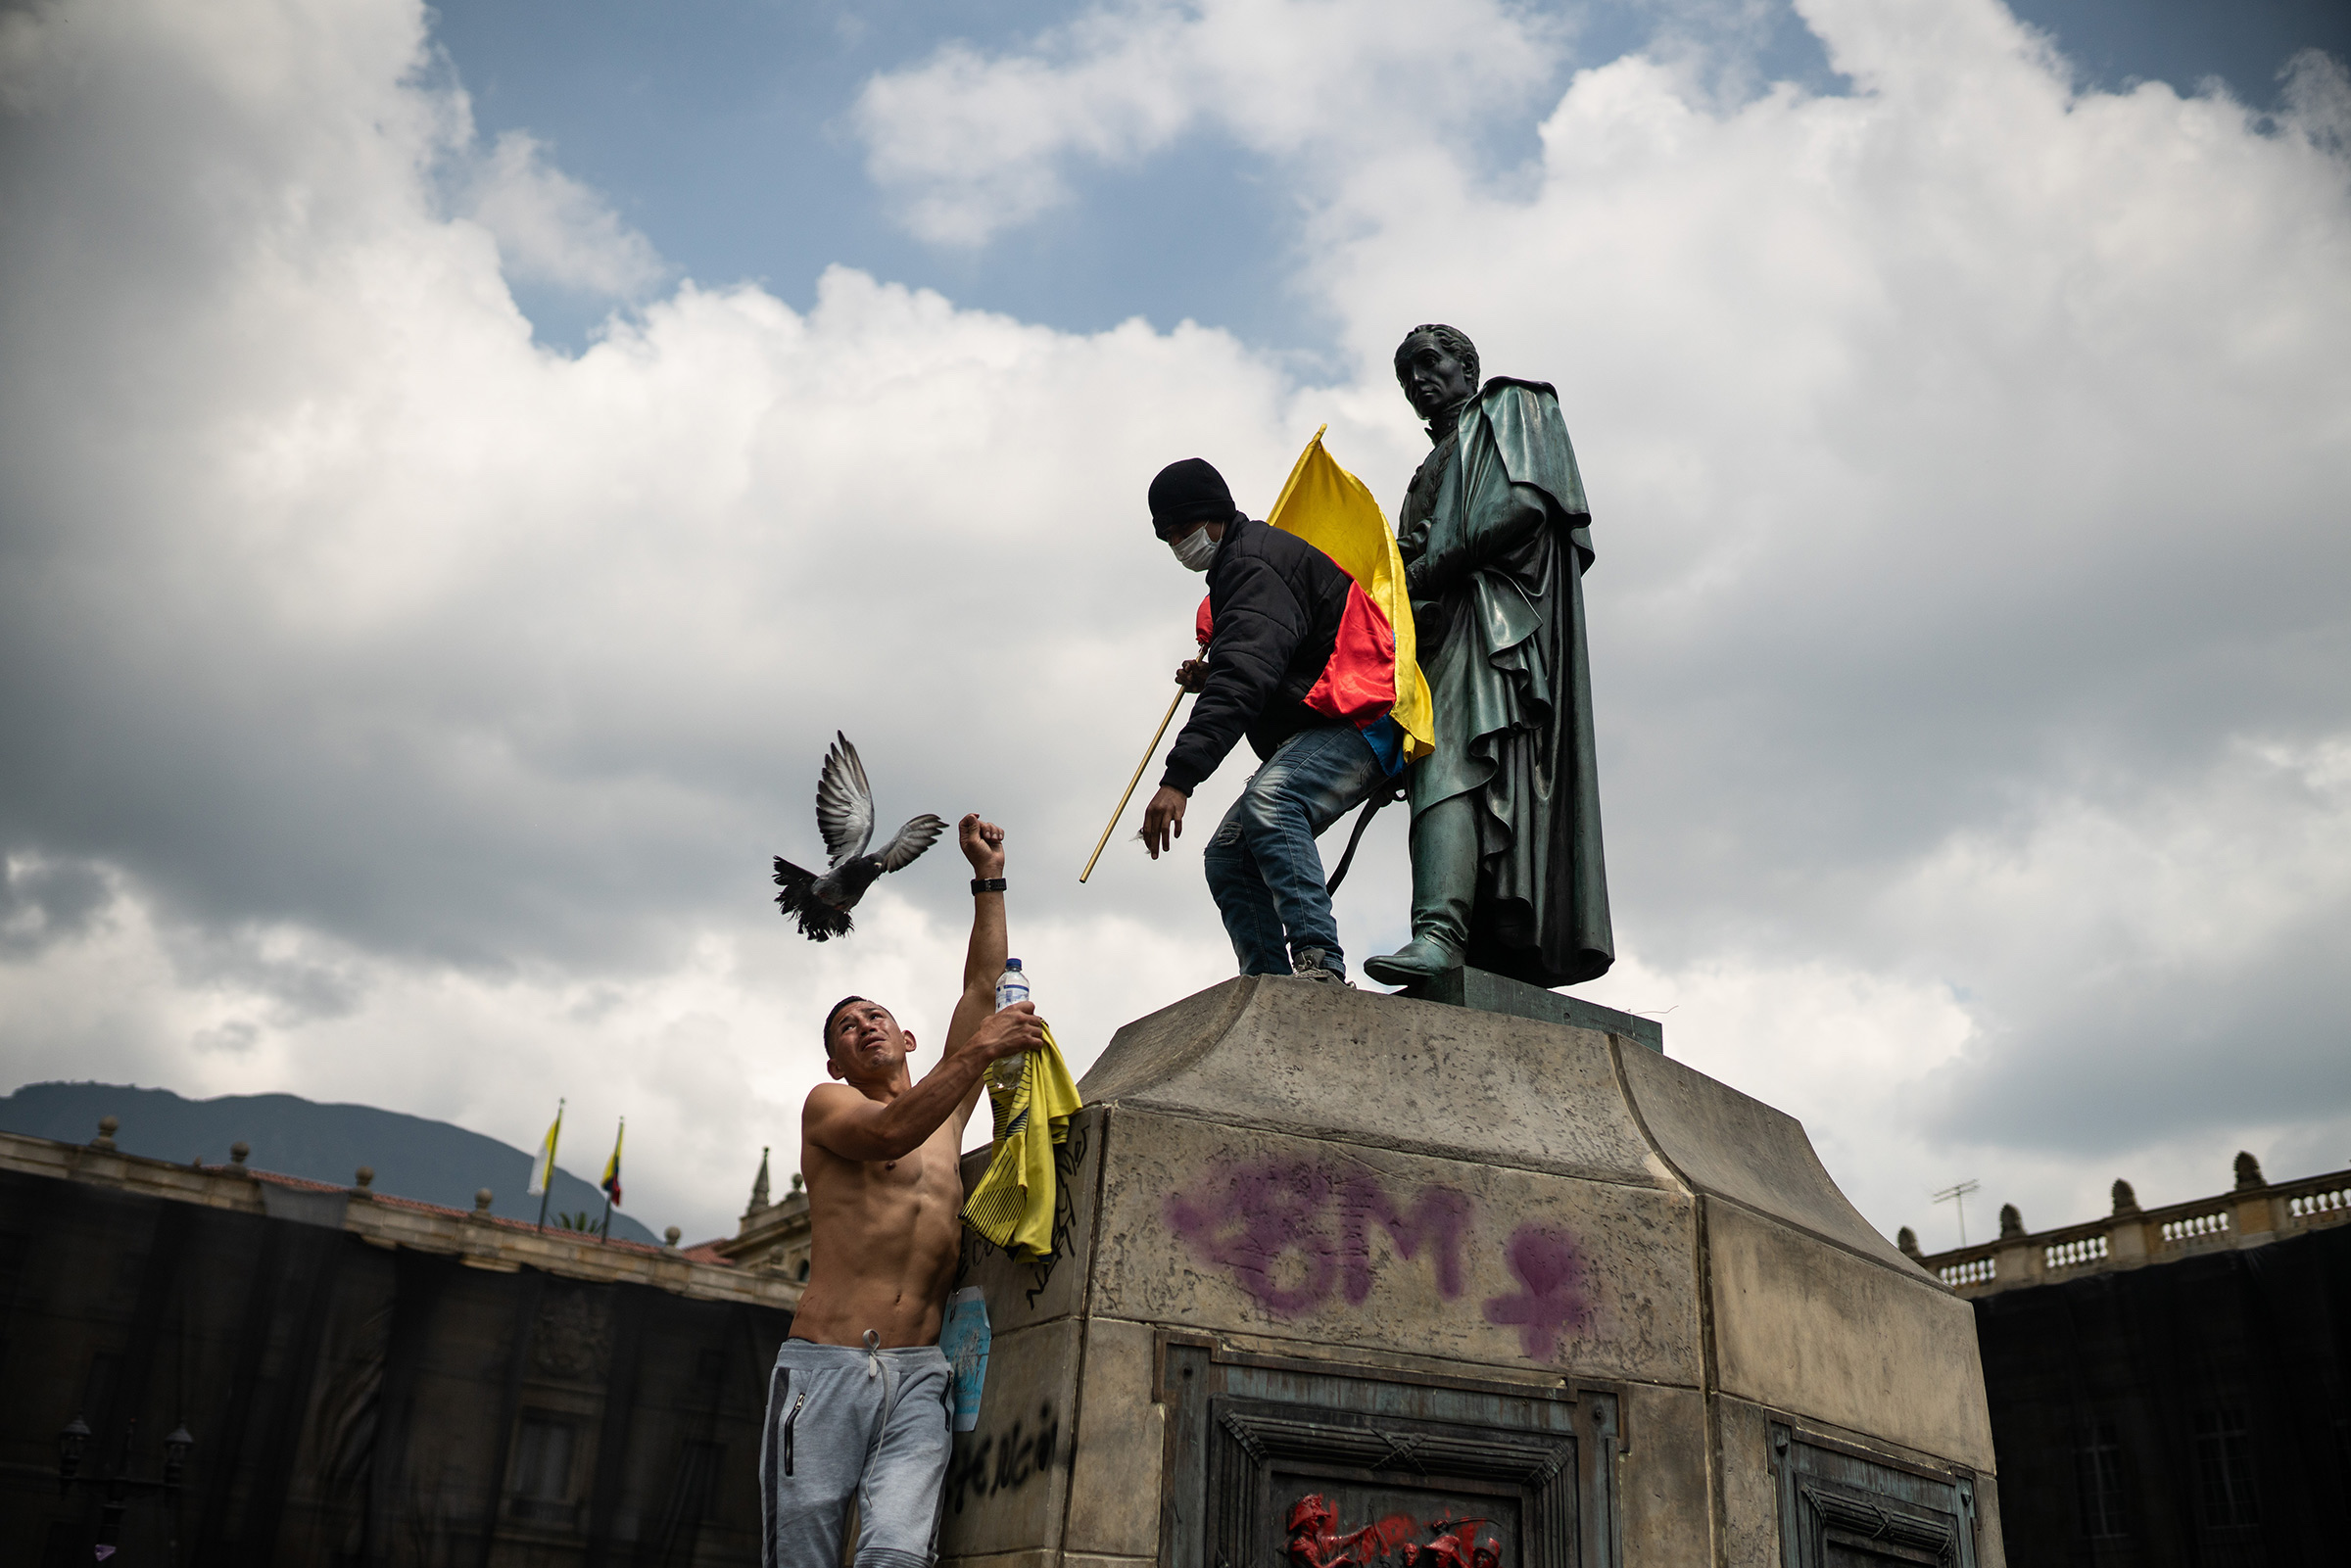 Protesters climb on the statue of Simón Bolívar, the South American independence leader and former president of Colombia, as thousands of Colombians take to the streets to protest against the government's tax reform in Bogotá on May 1.